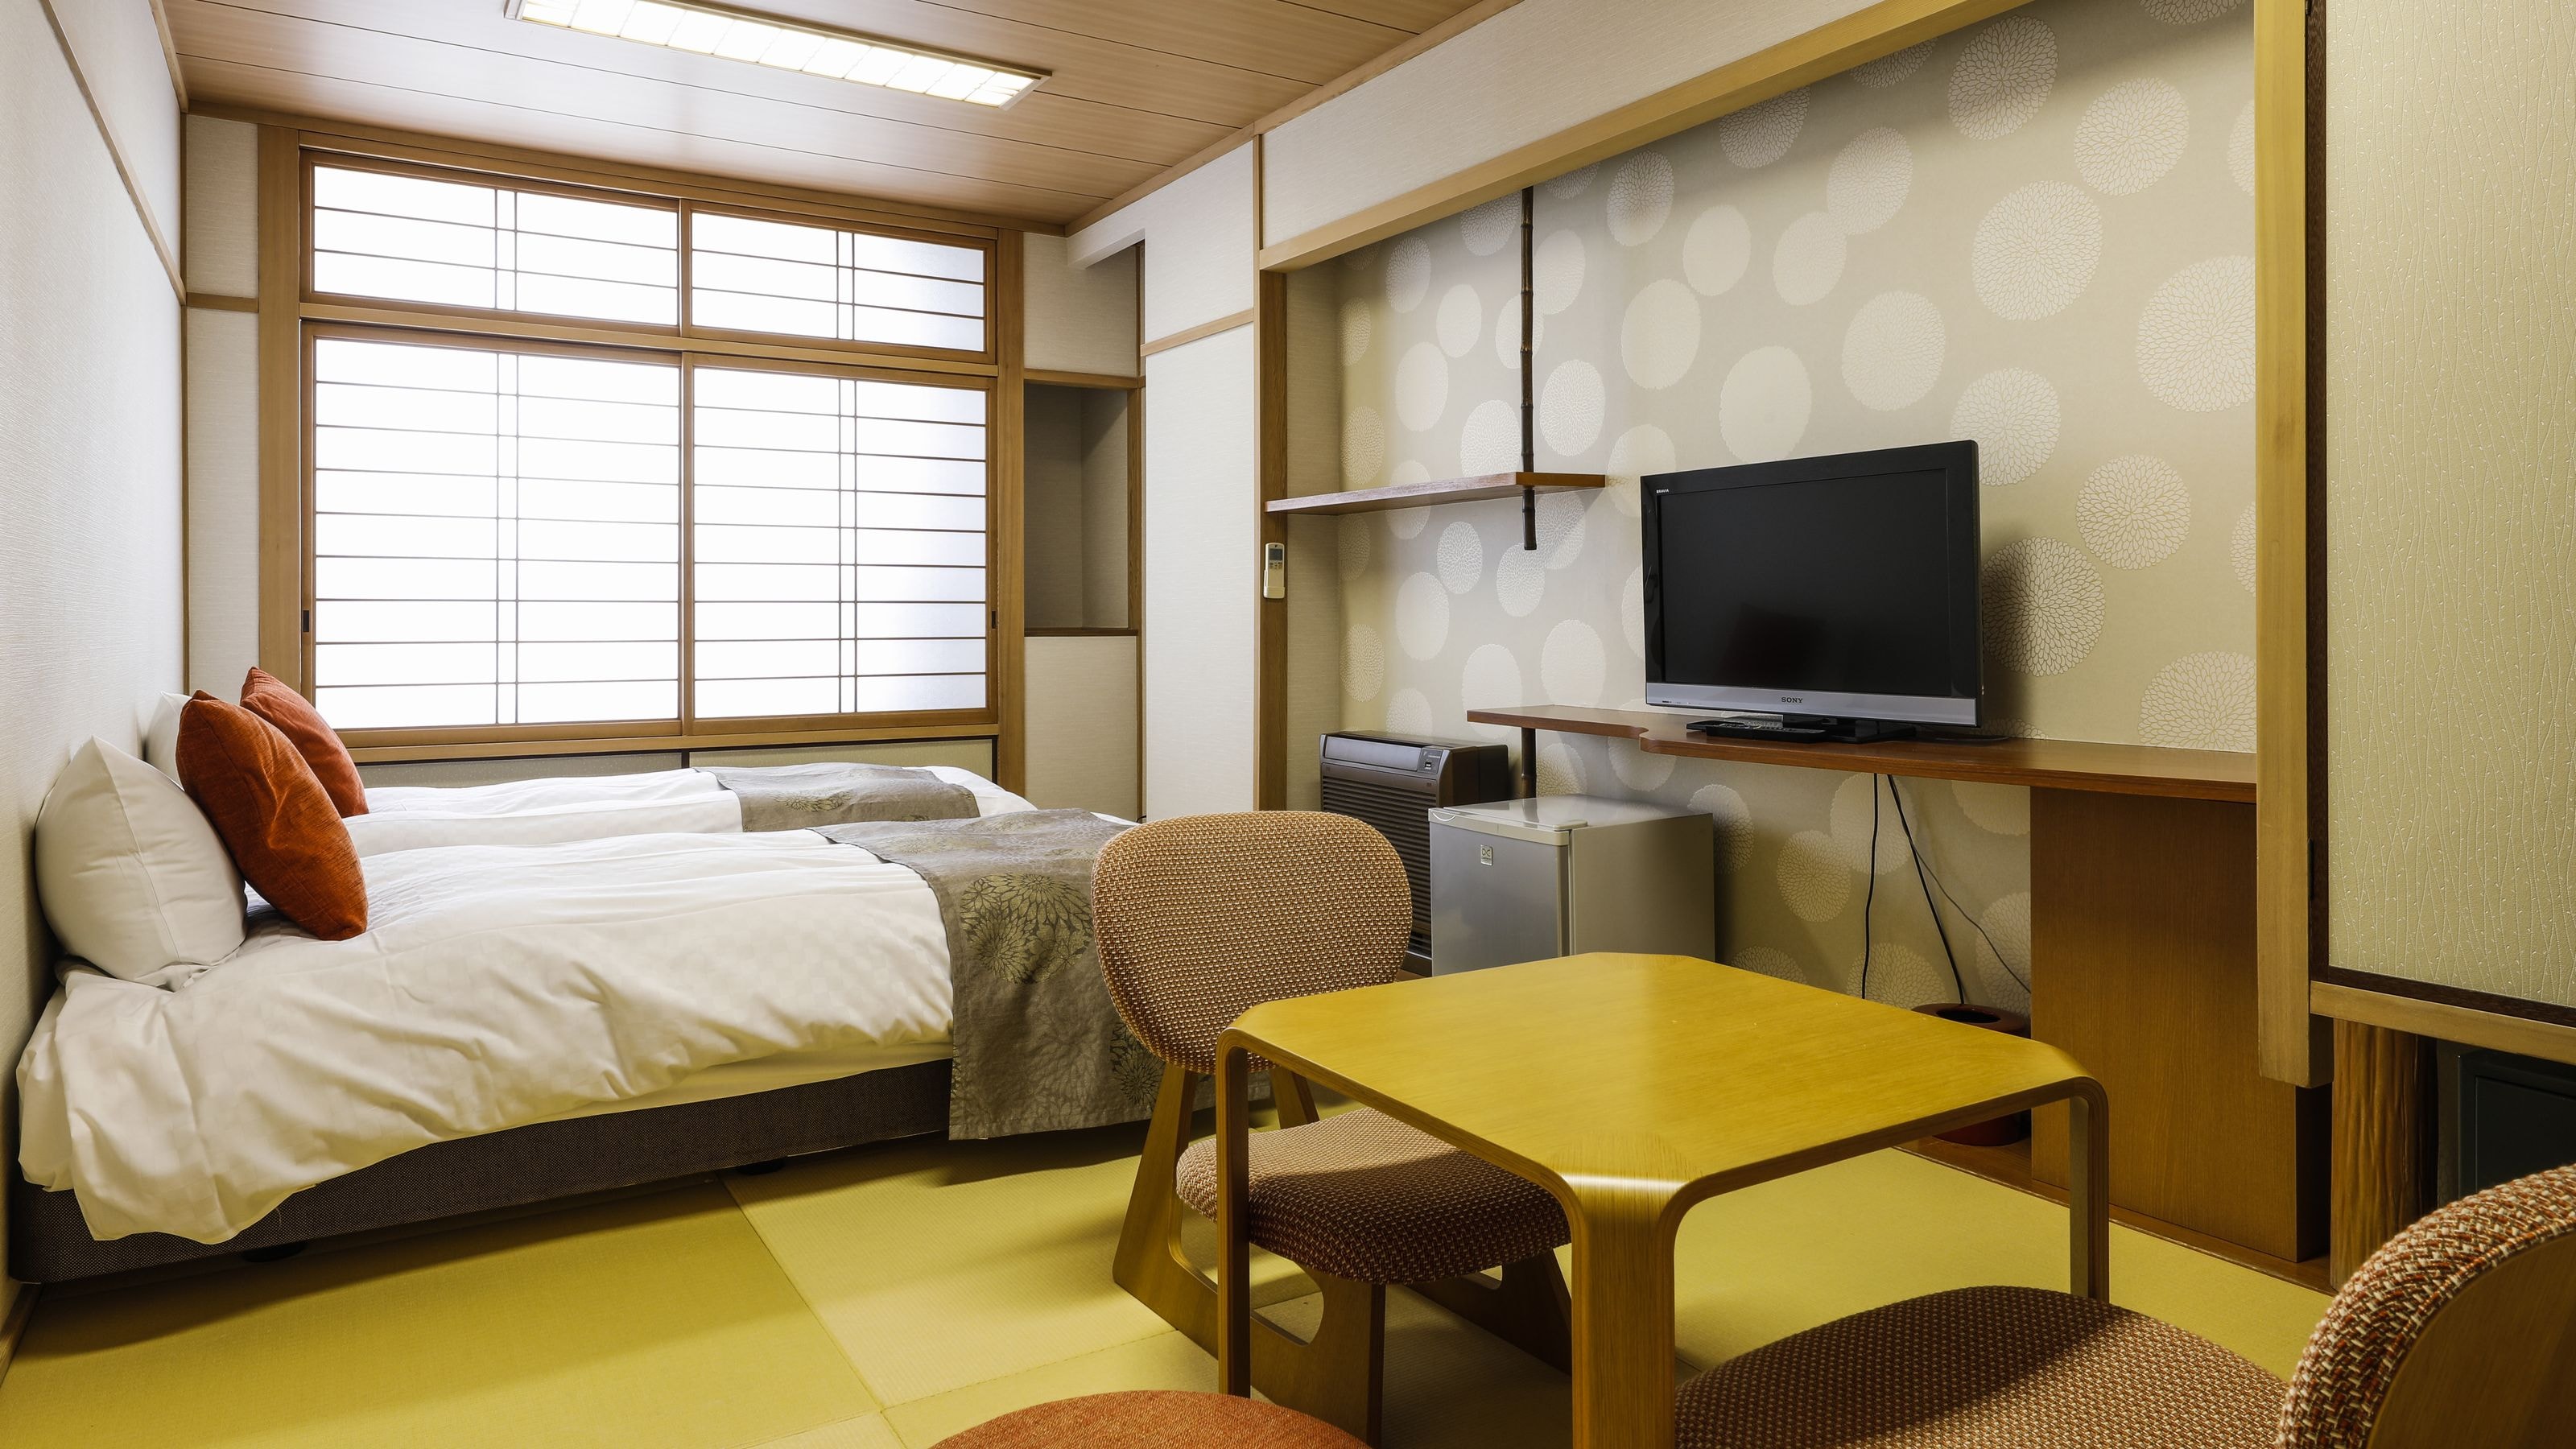 * Japanese modern example: Twin Simmons beds are available.